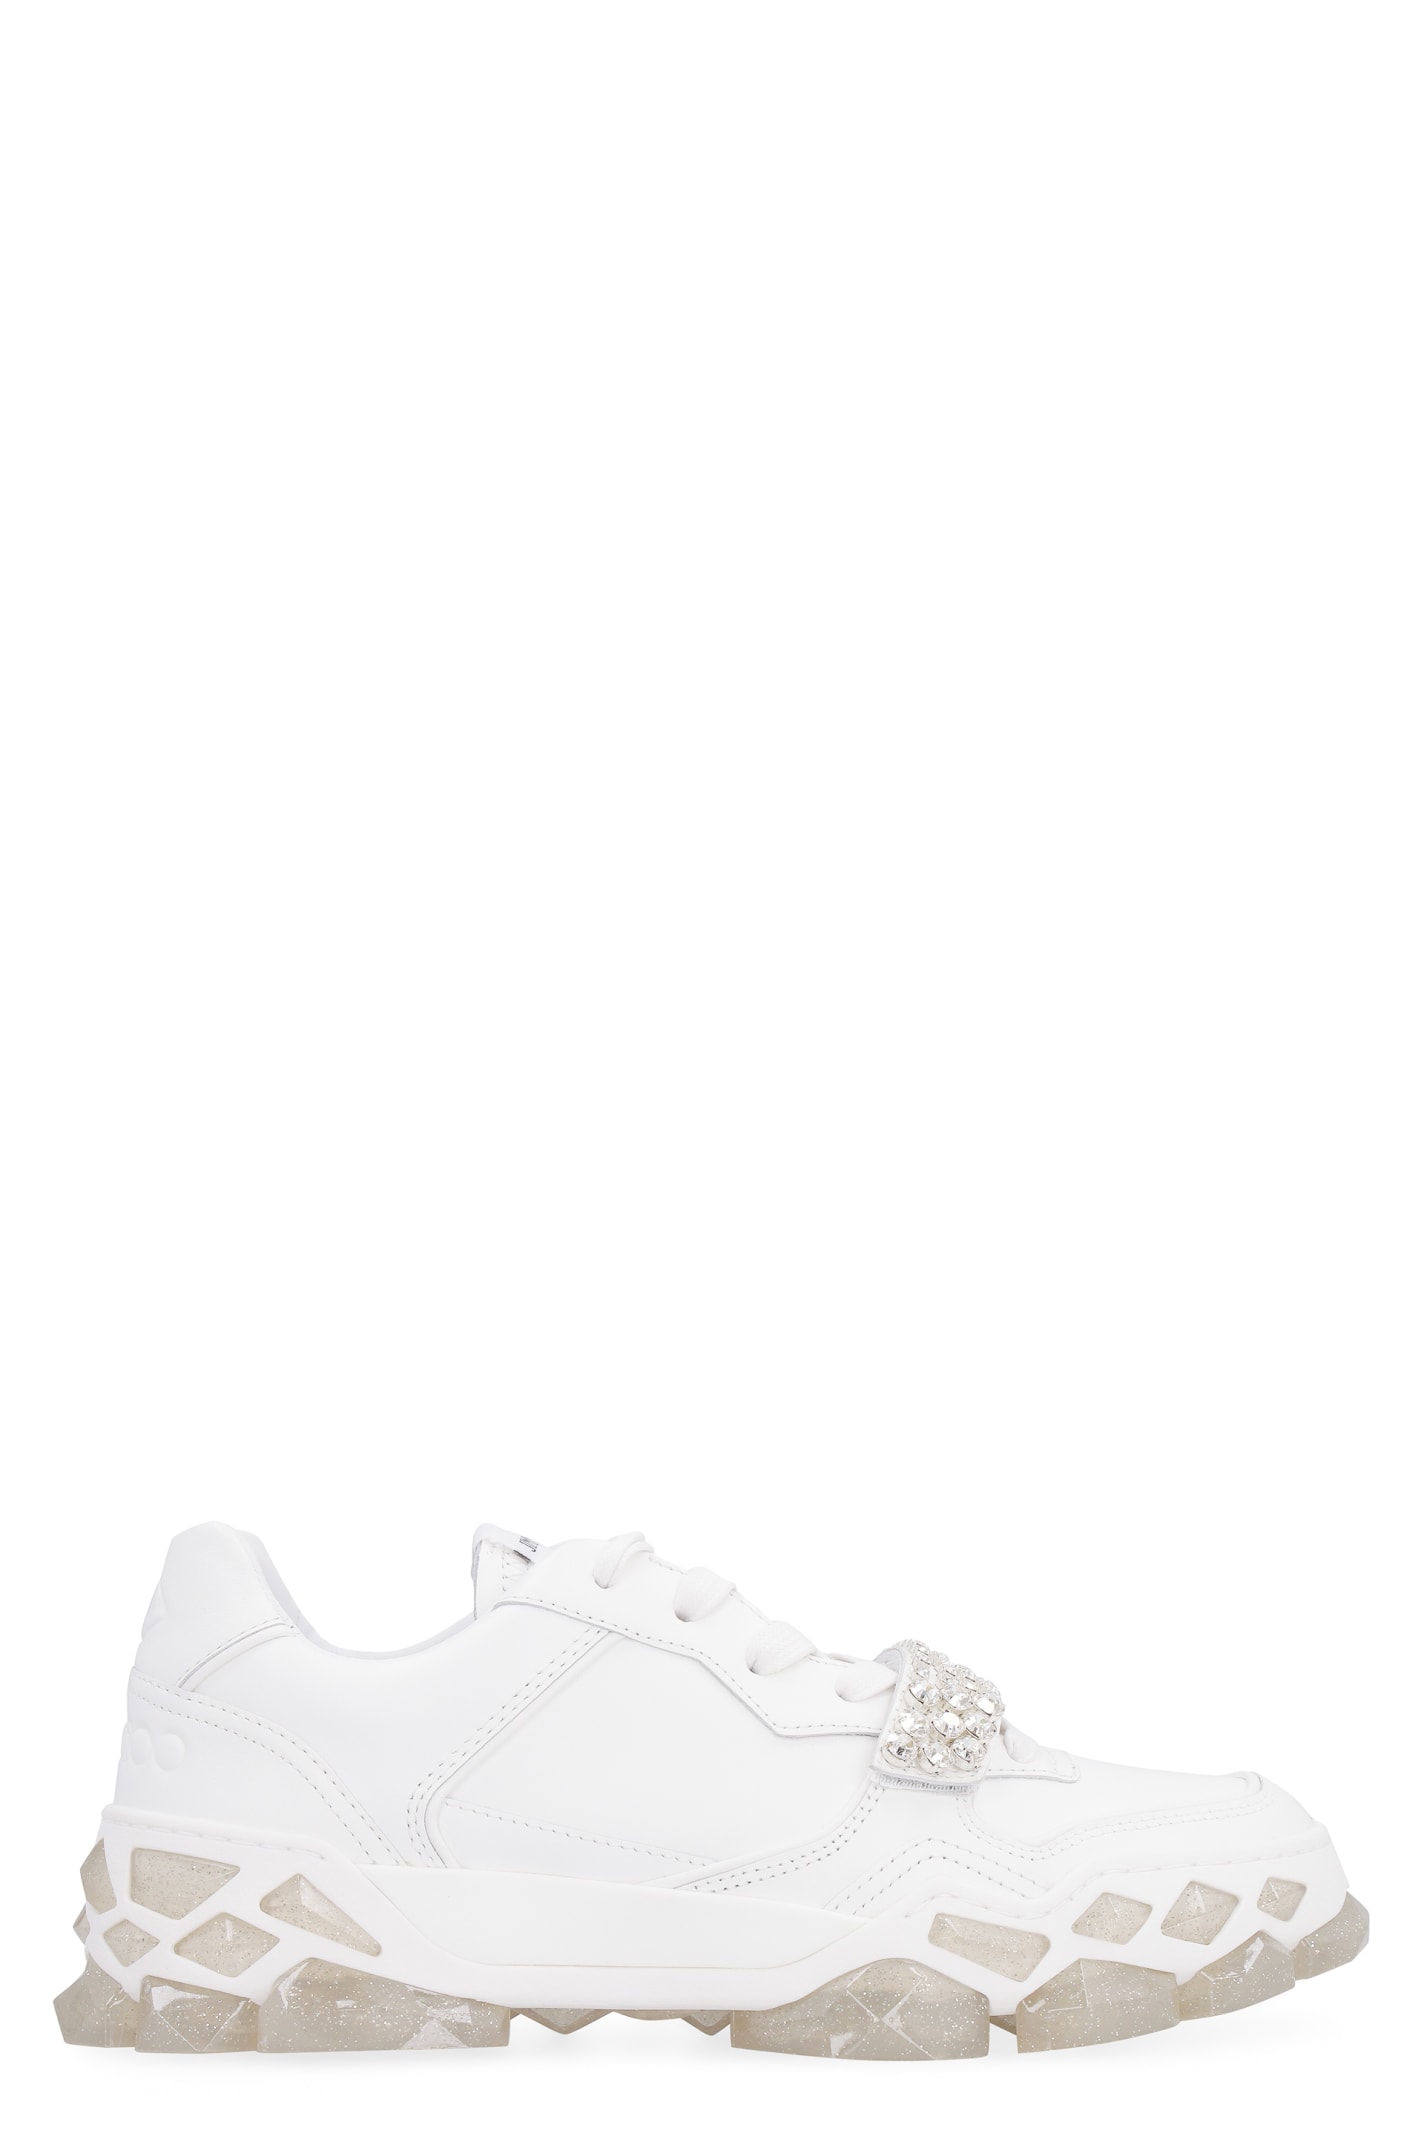 Buy Jimmy Choo Diamond X Leather Low-top Sneakers online, shop Jimmy Choo shoes with free shipping